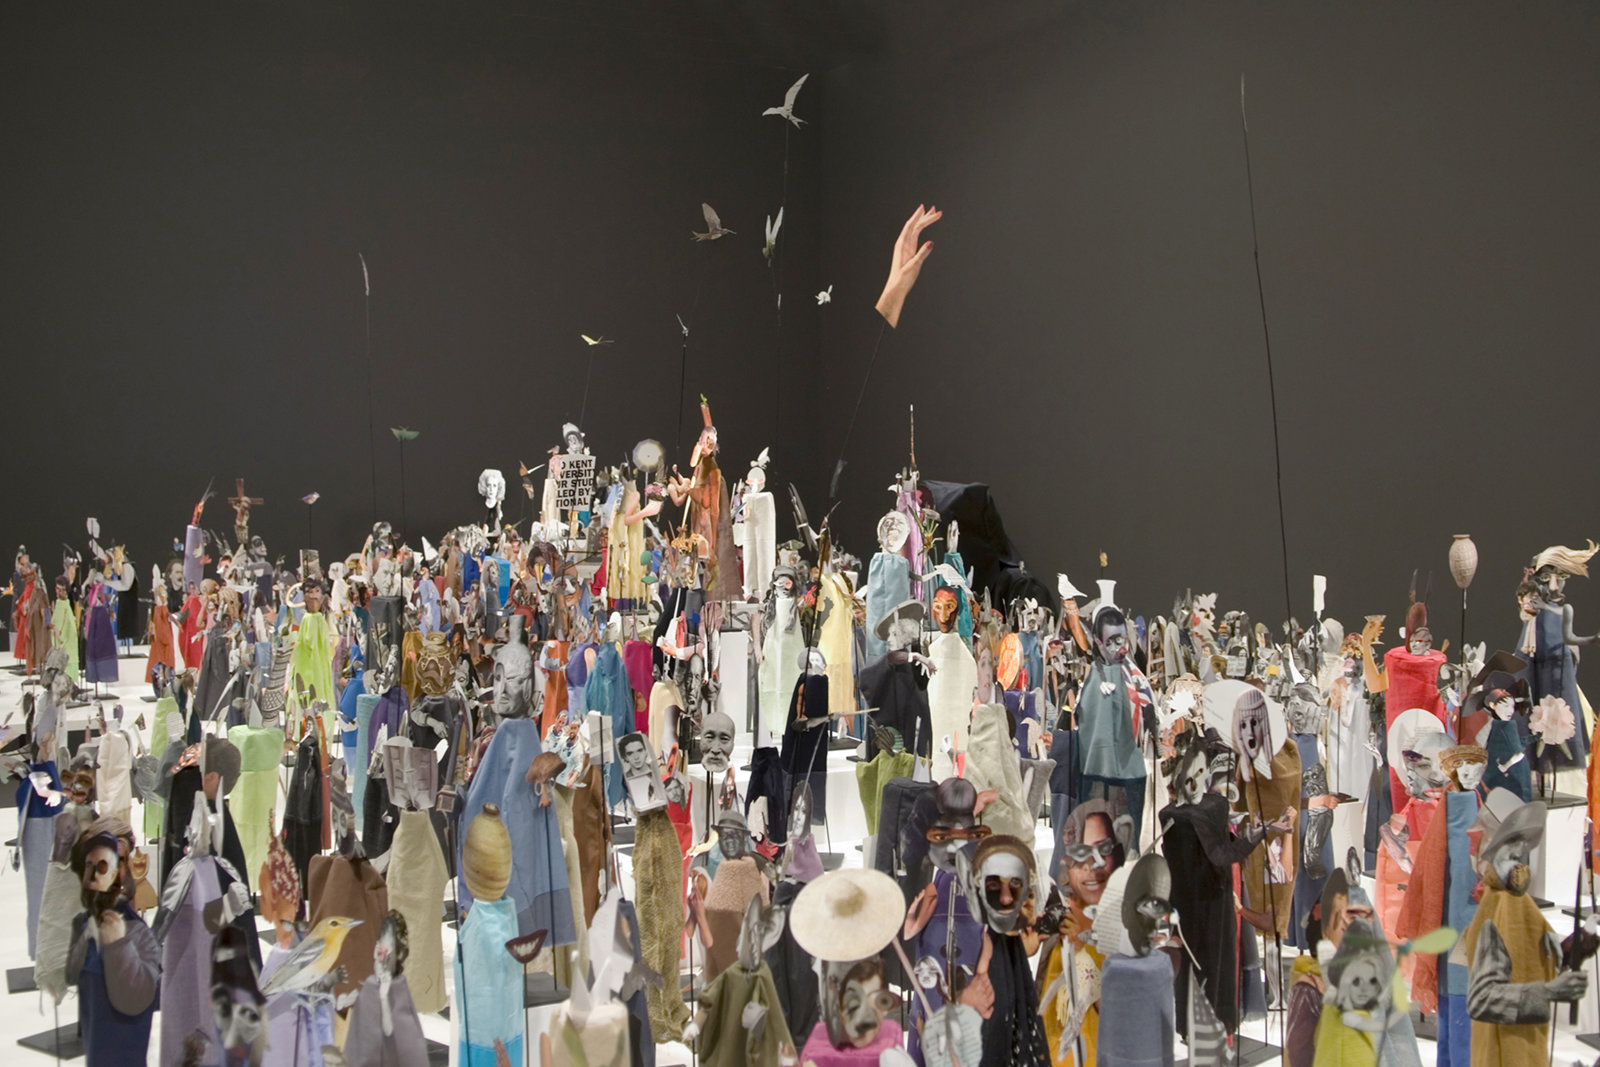 Geoffrey Farmer, The Surgeon and the Photographer, 2009, paper, textile, wood, and metal, 365 figures, dimensions variable. Installation view, Nomads, National Gallery of Canada, Toronto, 2009